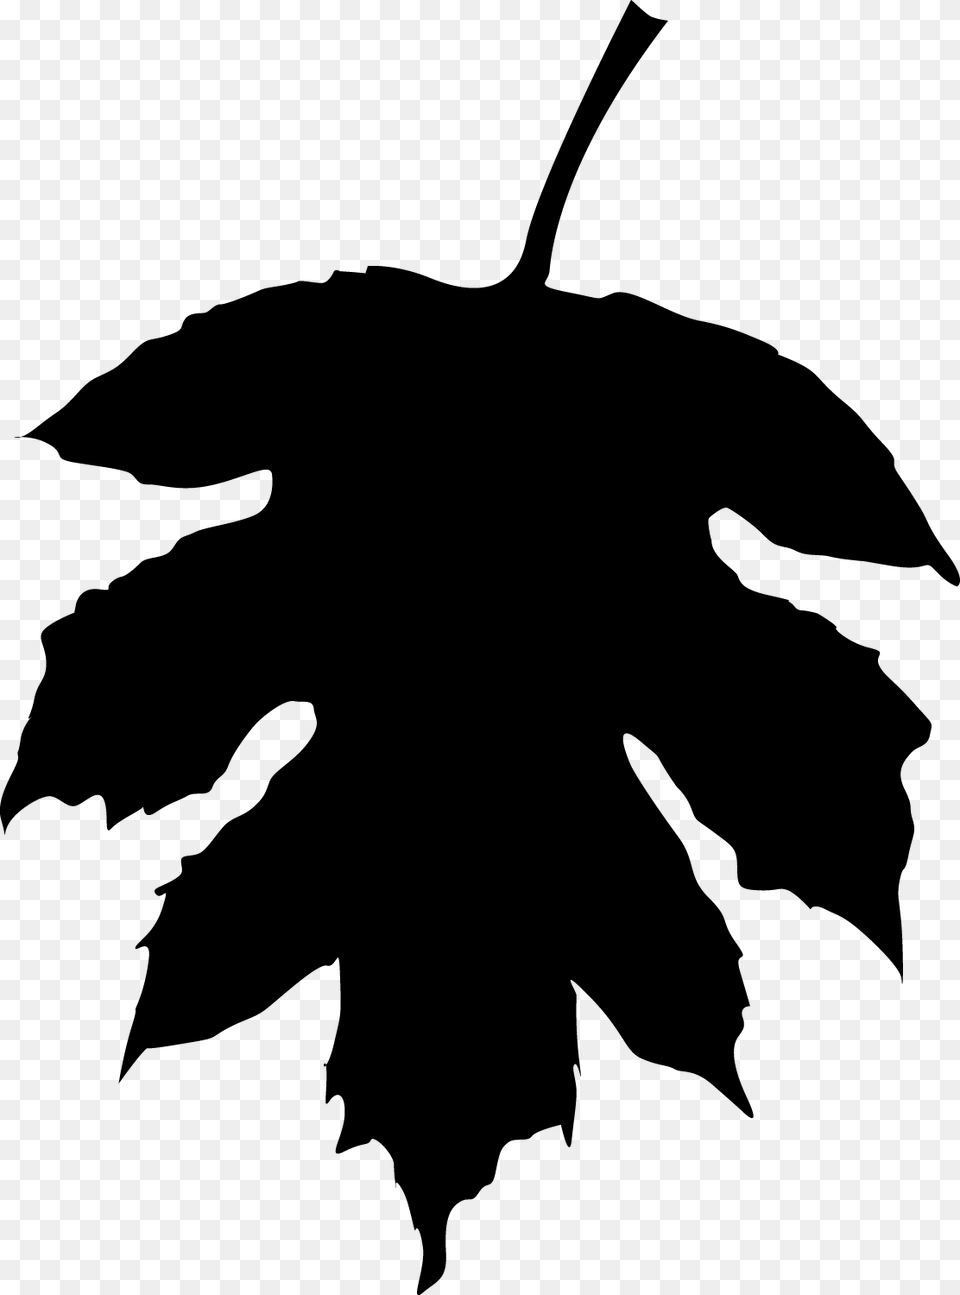 Fall Leaf Silhouette At Getdrawings Fall, Gray Png